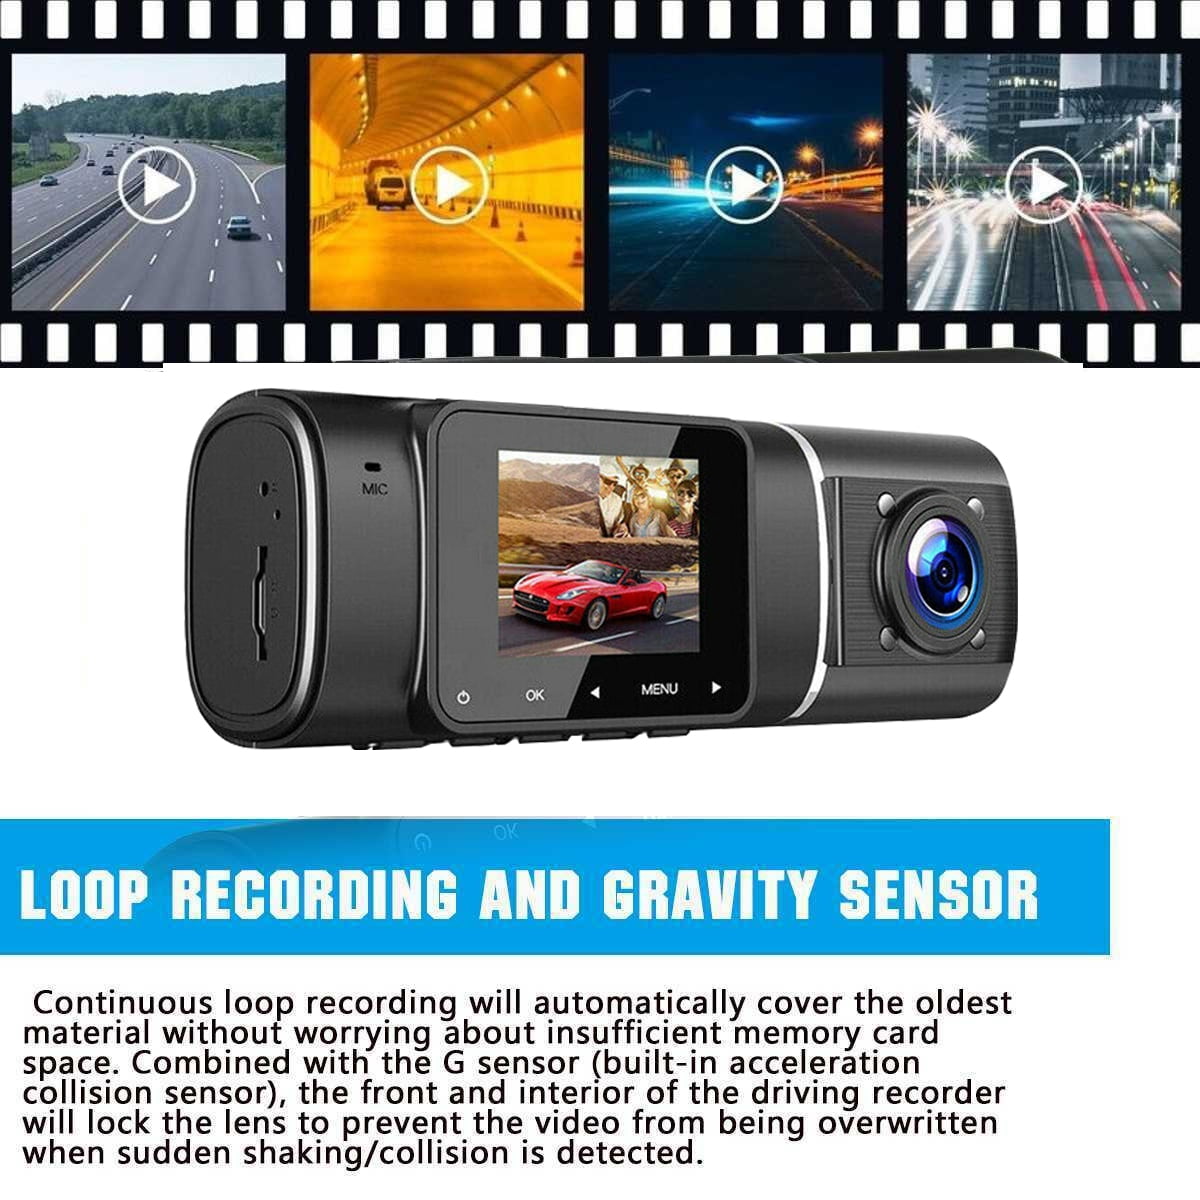 Dash Cam Pro Wi-Fi - As Seen on TV Dash Cam 360°, Motion Detection, 2.0”  LCD, 1080p HD, Dashboard Camera Video Recorder, Loop Recording, Night-Mode